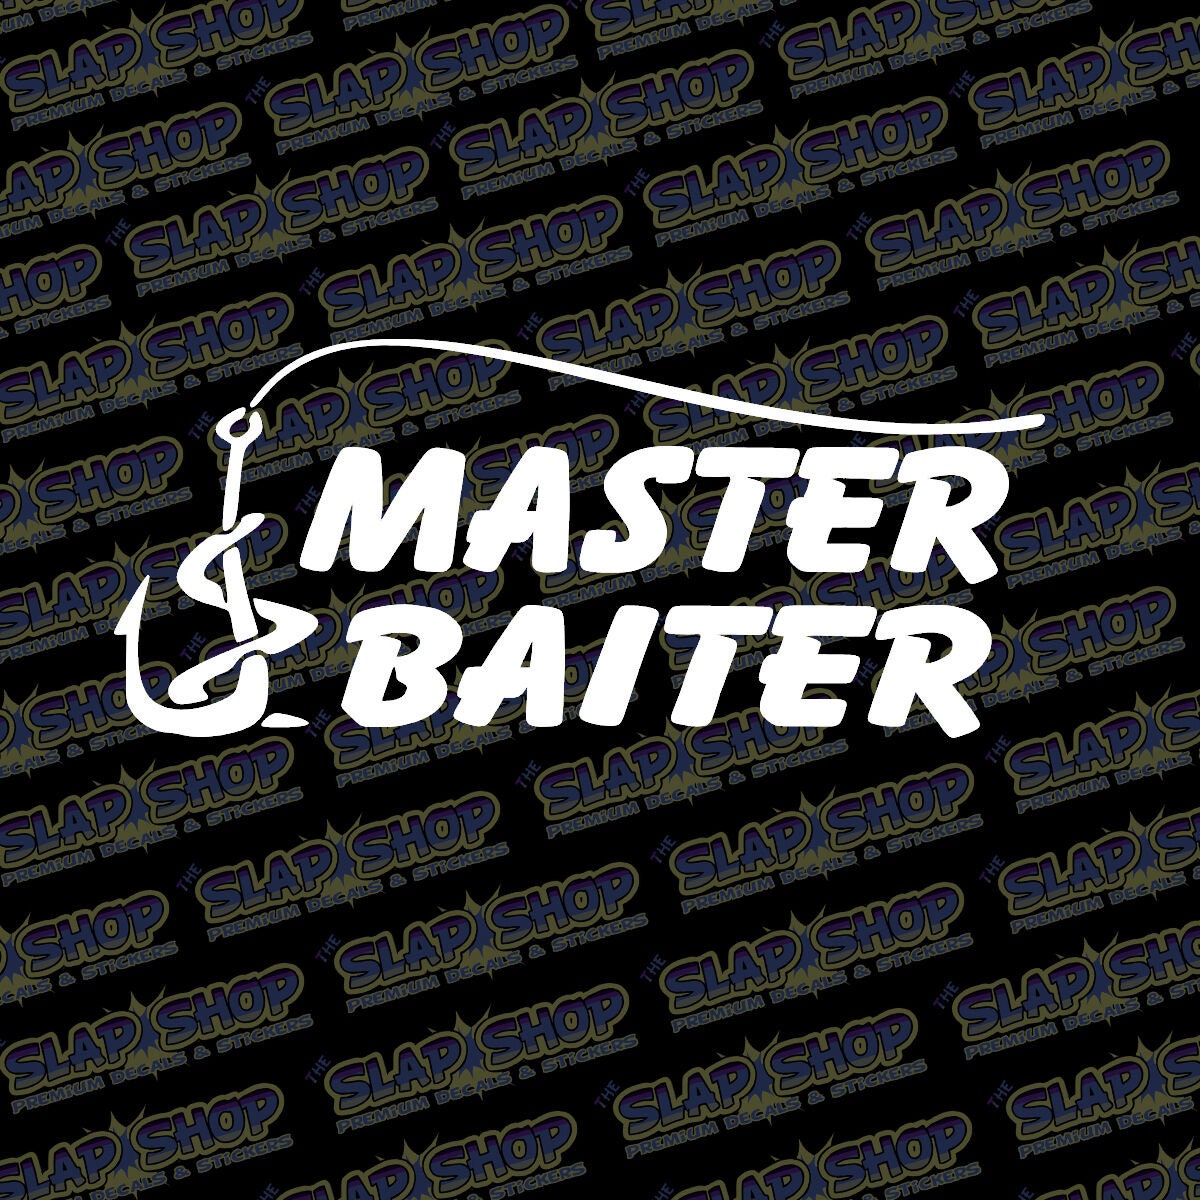 Master Baiter Die Cut Vinyl Decal for Car, Truck, Laptop, Window's CLICK to  EXPLORE More Colors and Size Options and Free Shipping 